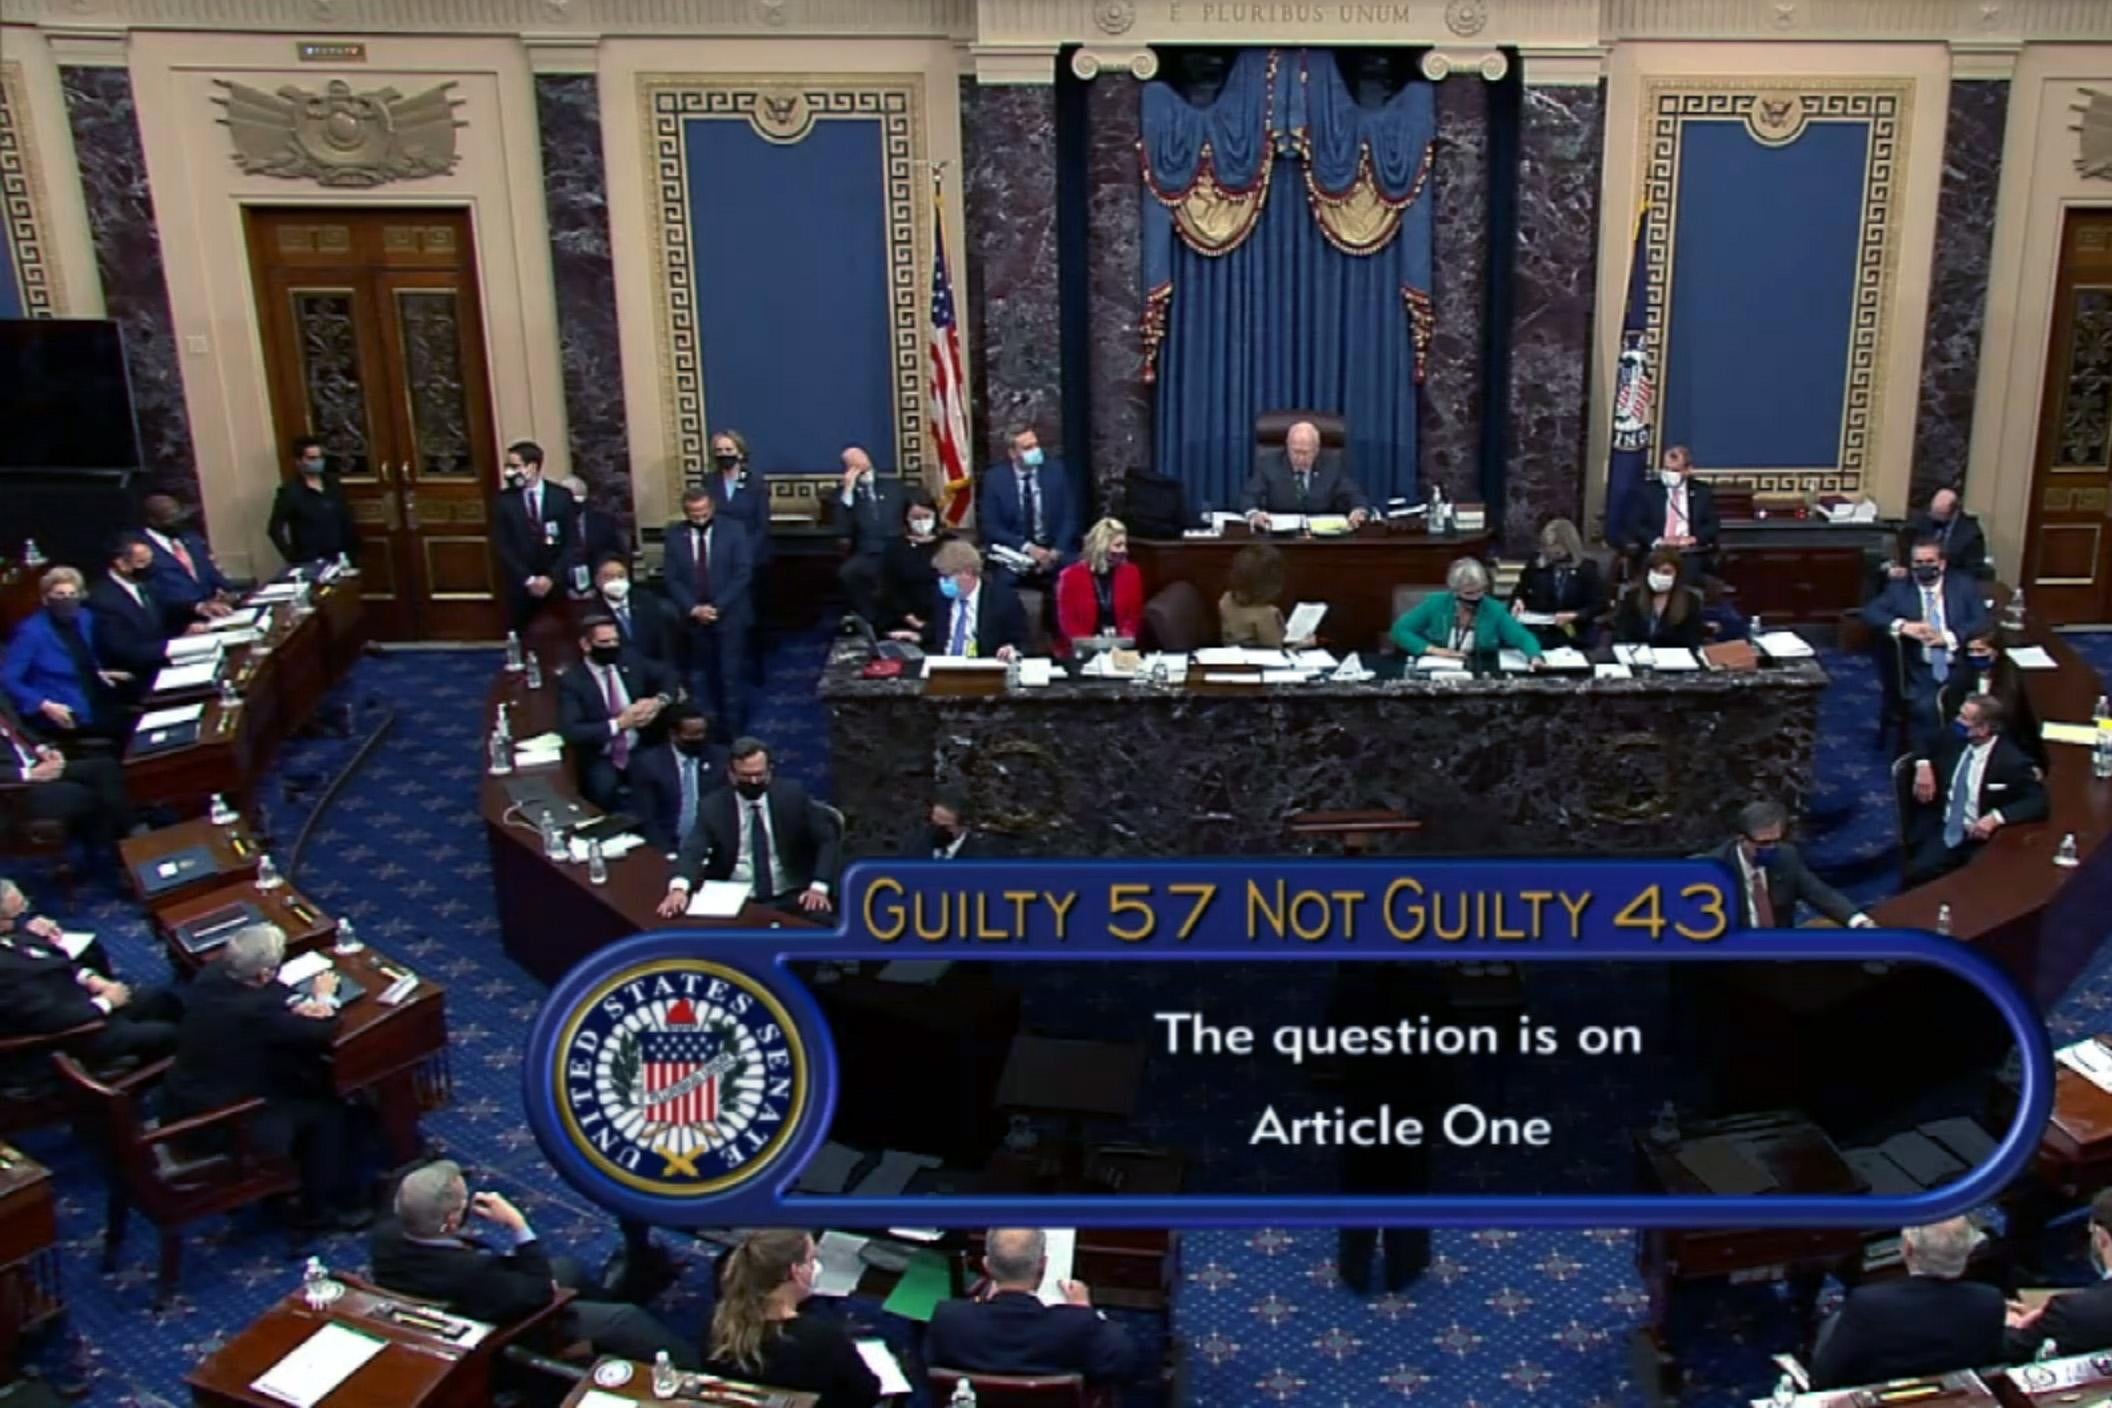 In this screenshot taken from a congress.gov webcast, Senate votes 57-43 to acquit on the fifth day of former President Donald Trump's second impeachment trial at the U.S. Capitol on February 13, 2021 in Washington, D.C.